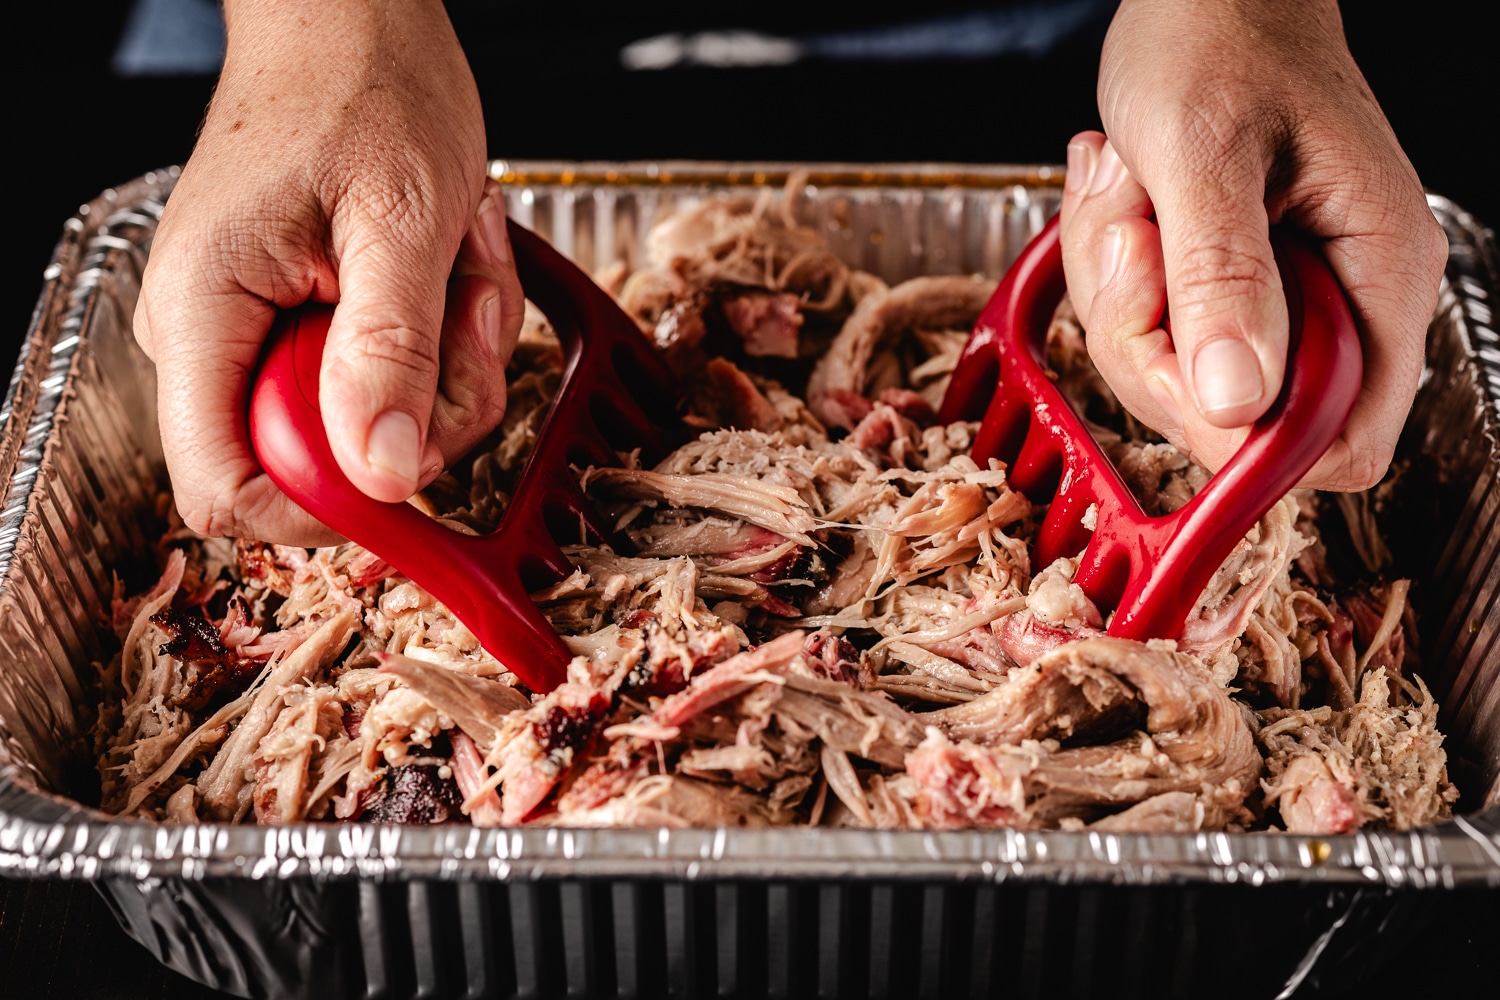 Smoked pulled pork being shredded in an aluminum pan.